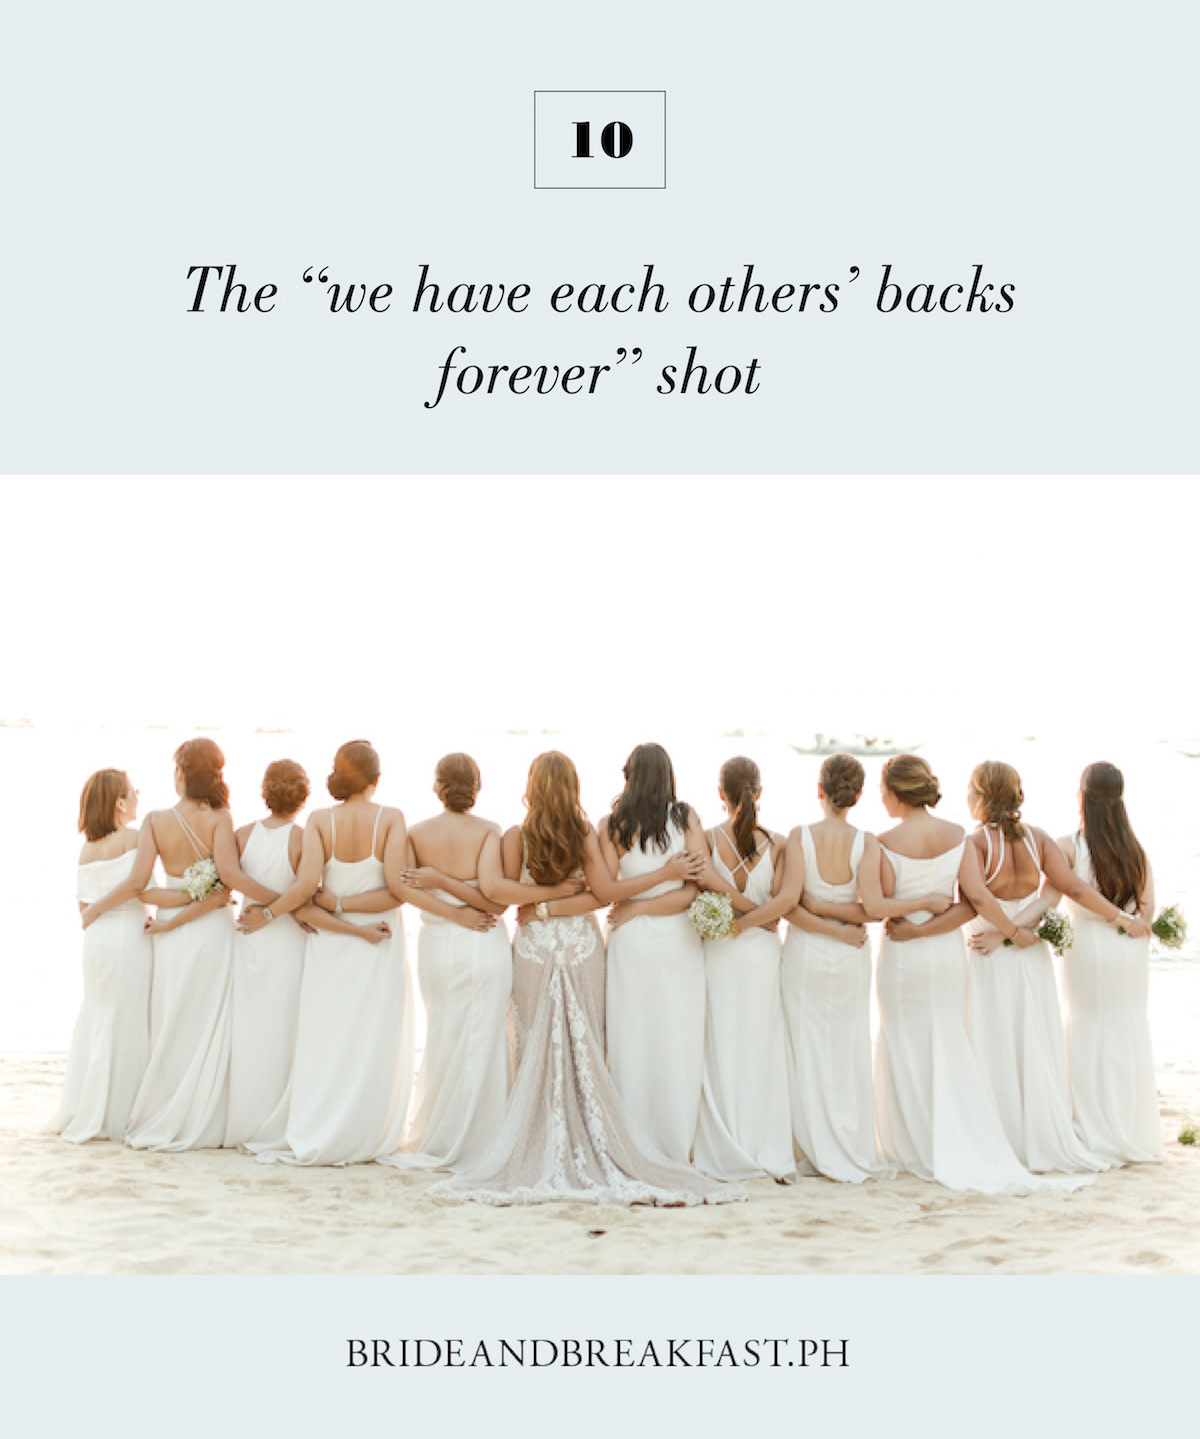 10. The "we have each others' backs forever" shot